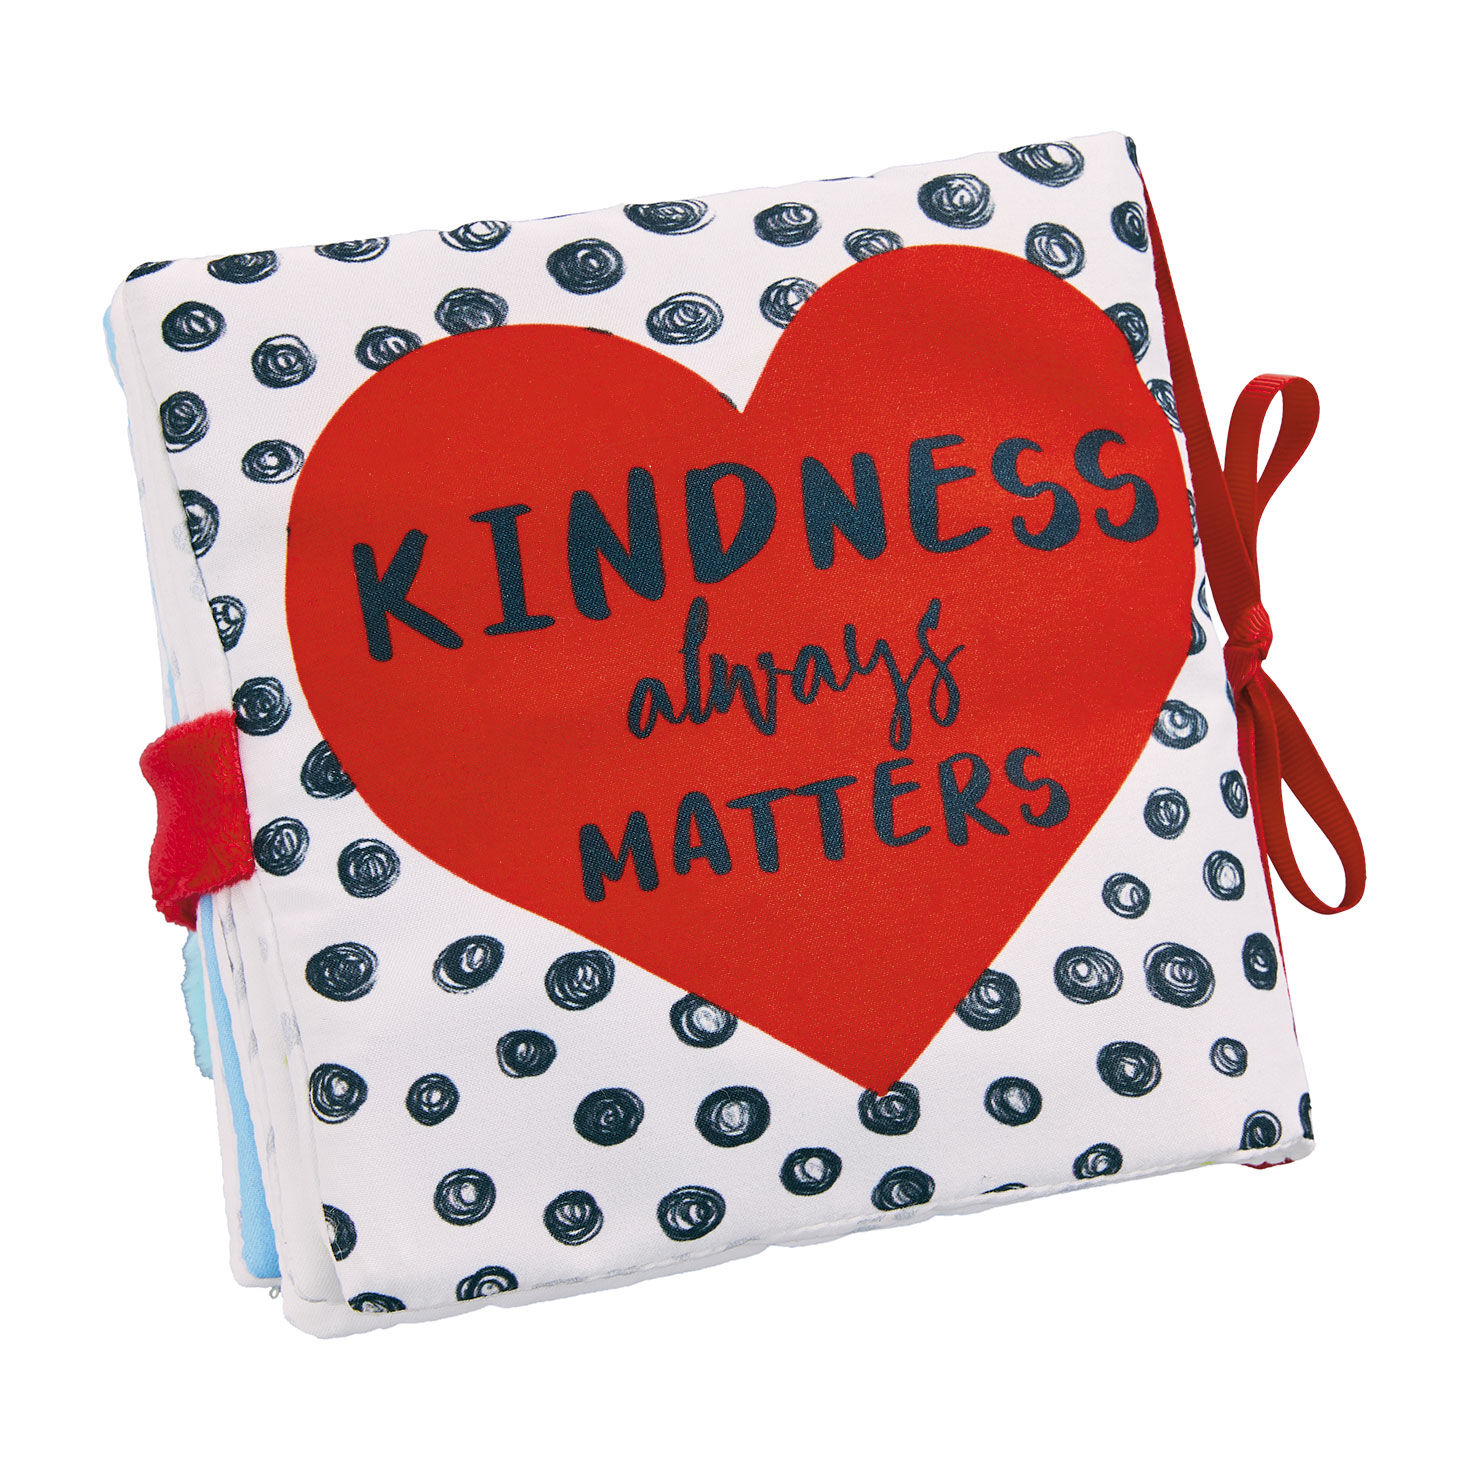 Mud Pie Be Kind Cloth Book for only USD 14.99 | Hallmark